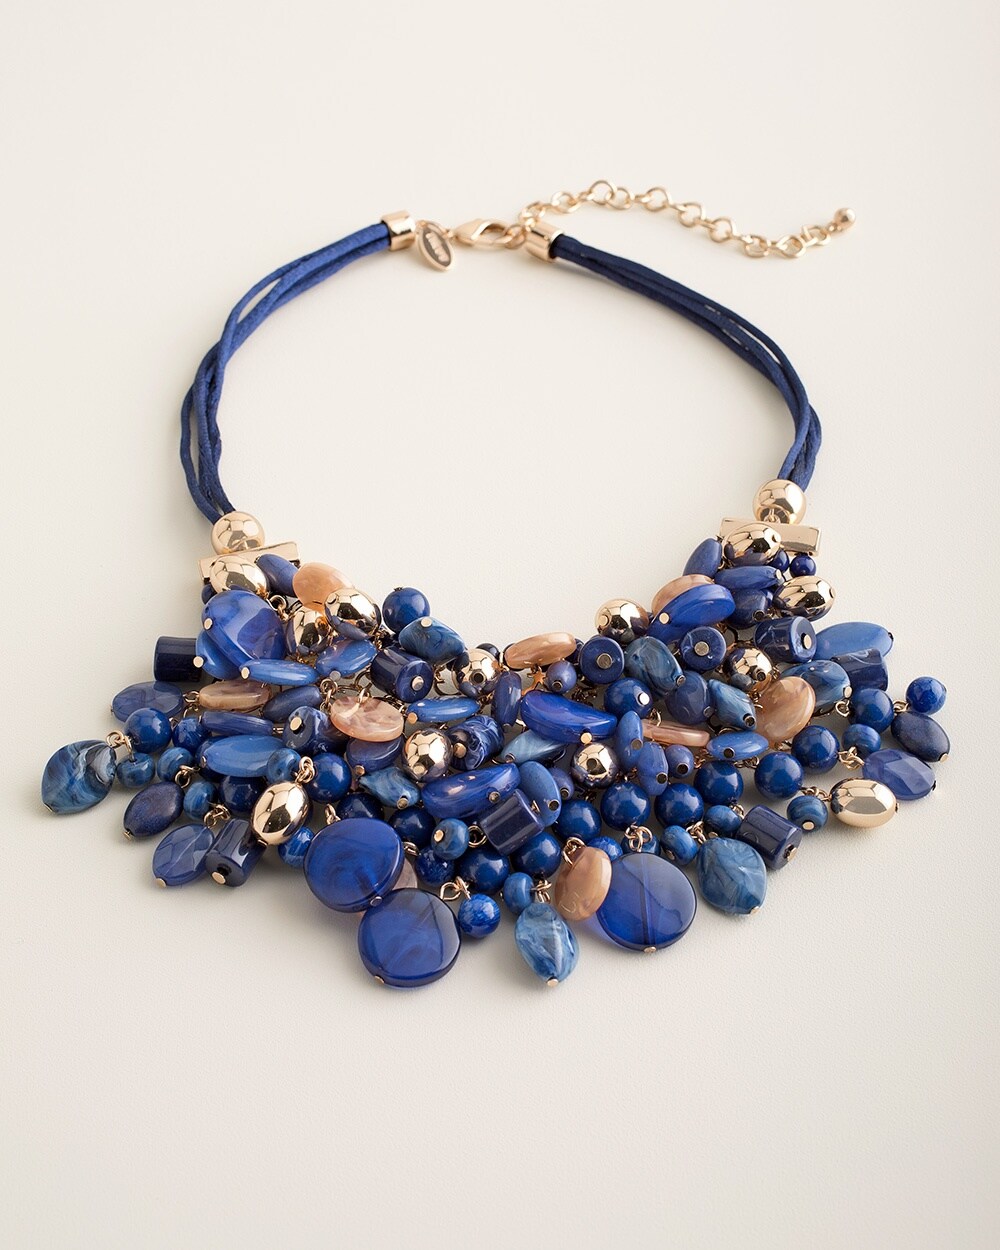 Blue and Neutral Bib Necklace